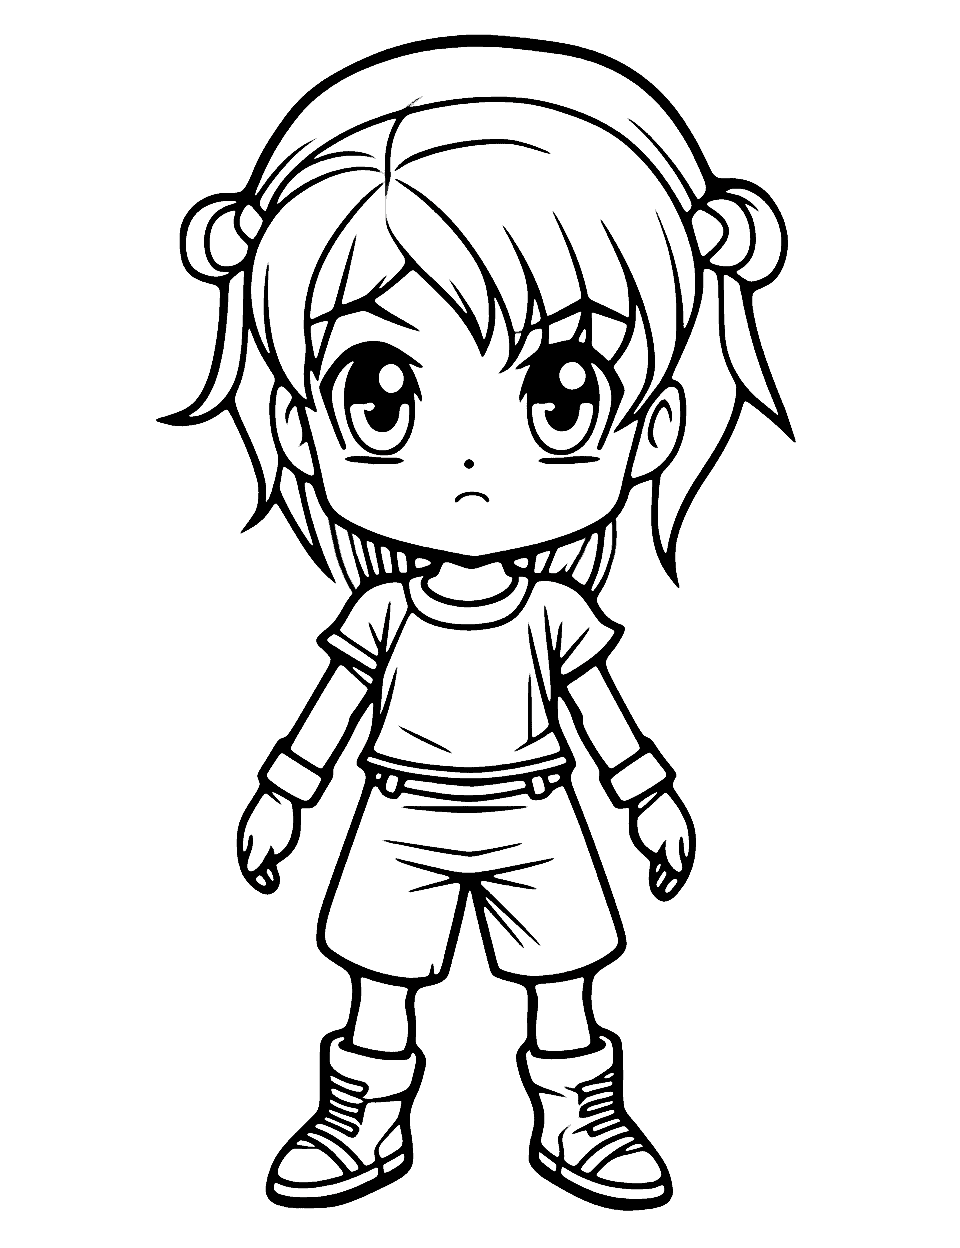 Easy Chibi Character Anime Coloring Page - An easy-to-color chibi character with simple shapes and features, perfect for beginners.